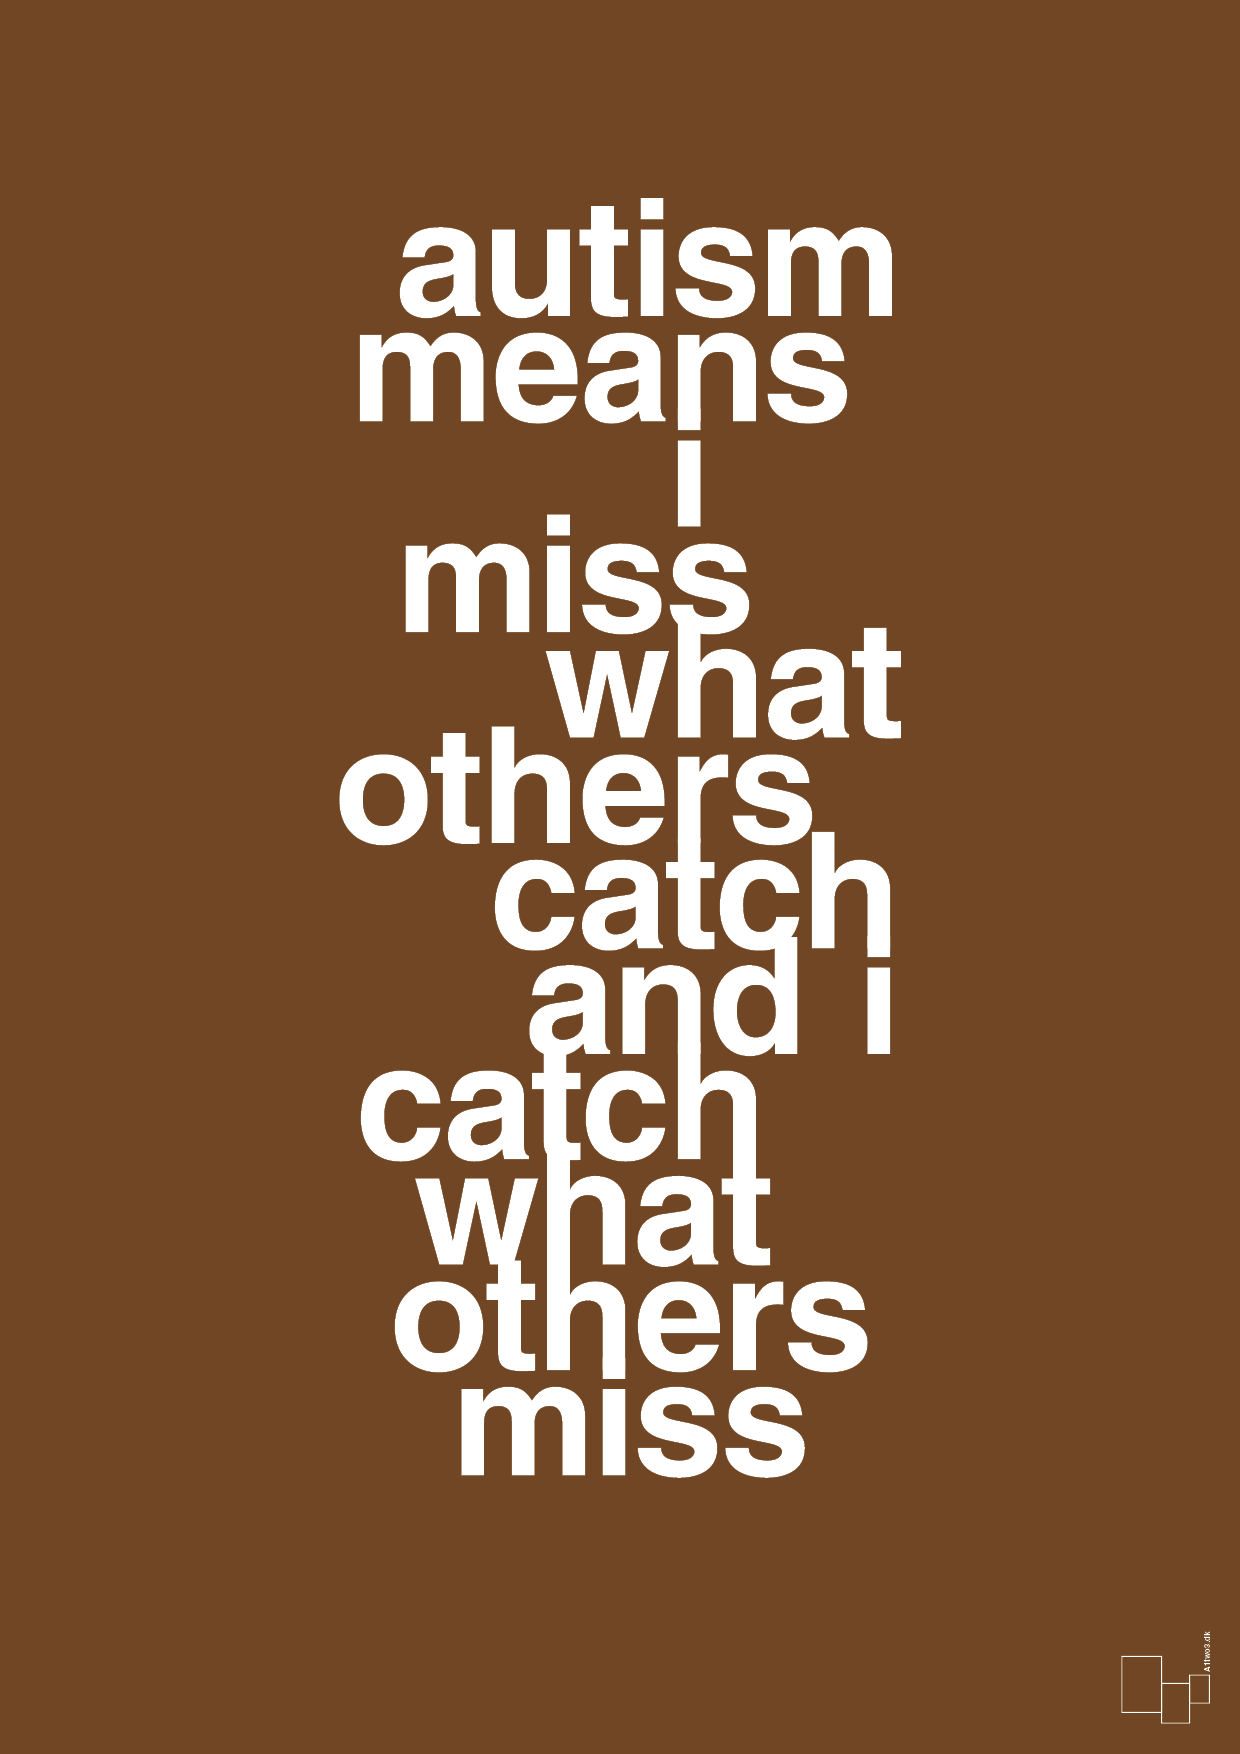 autism means i miss what others catch and i catch what others miss - Plakat med Samfund i Dark Brown